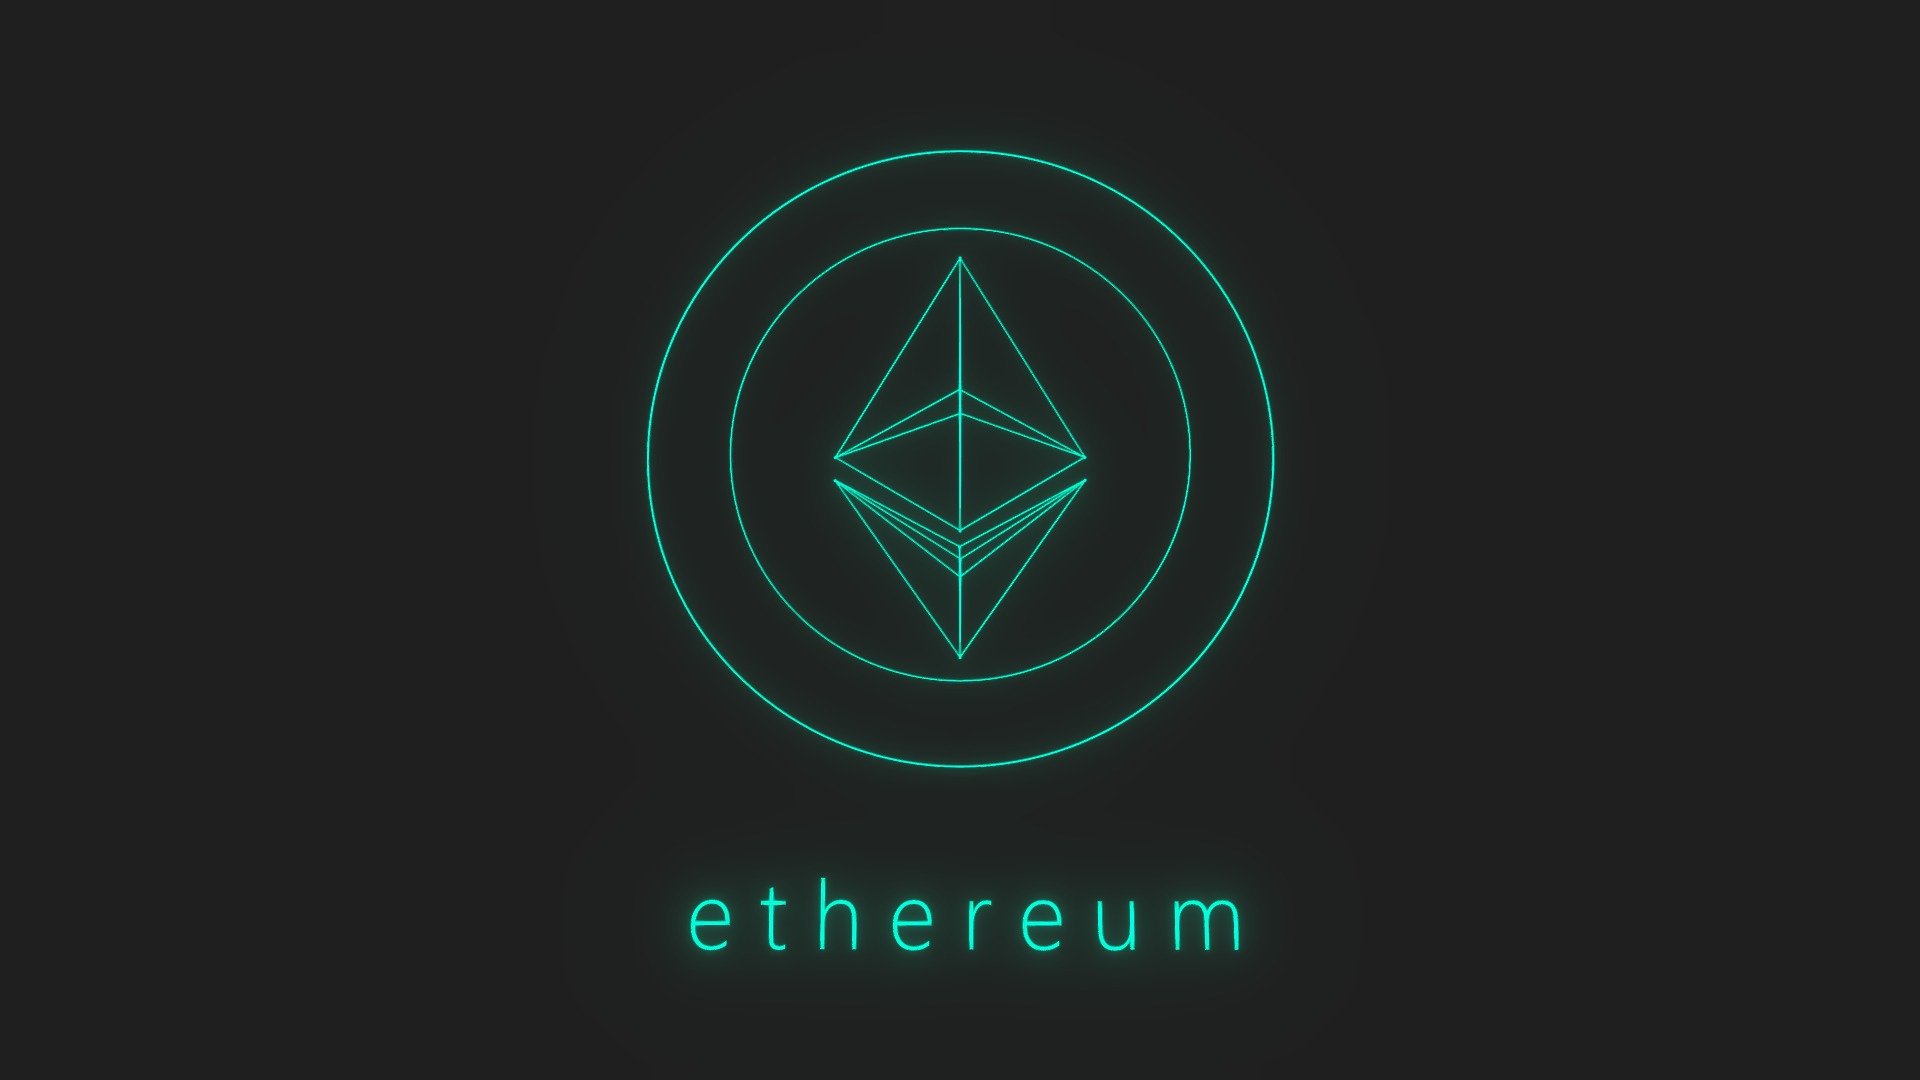 UPDATED
April 13, 2021 | 10:51 AM Pacific time
- Fixed the FBX file. The textures are now embedded

A 3D logo for Ethereum. made with Blender and Substance painter.

Its a bit low poly and very minimalistic at the same time 3d model